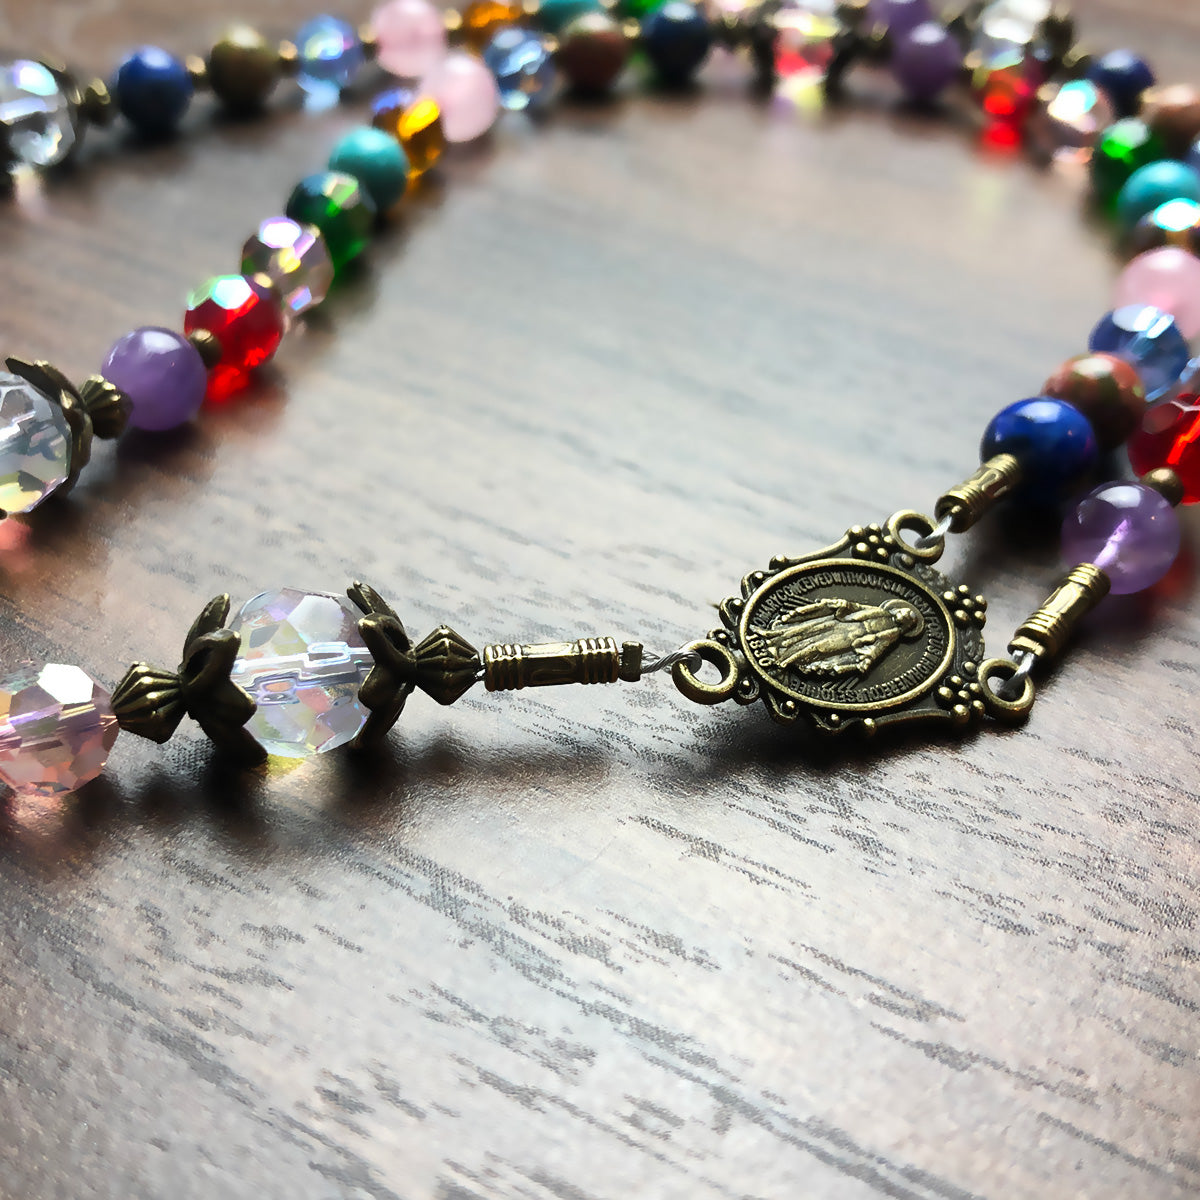 Basilica Window Crystal and Stone Rosary With Miraculous Medal by Catholic Heirlooms - Confirmation - Holy Communion Gift - Rosary Necklace